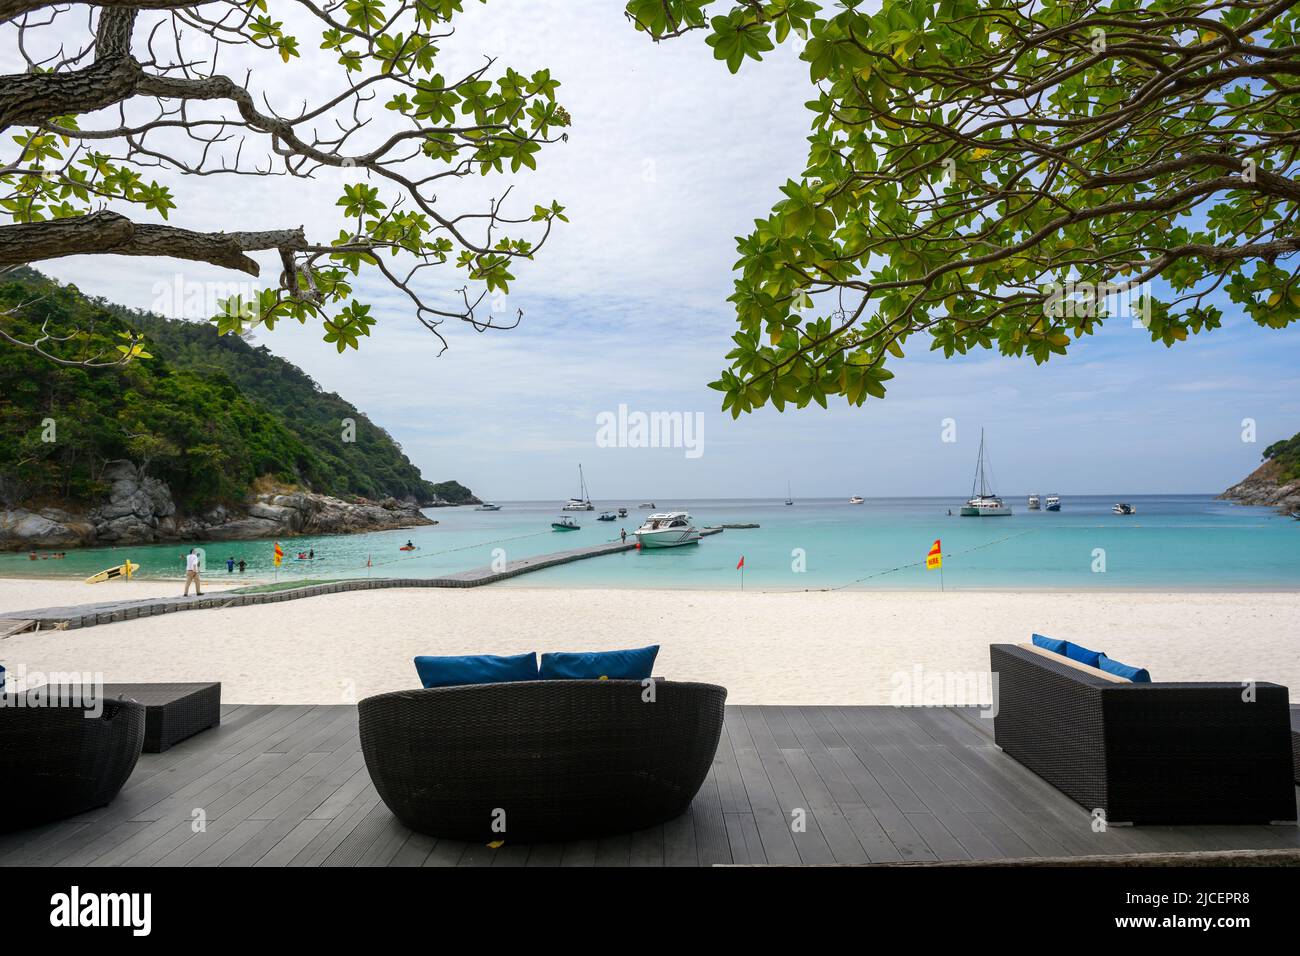 Wooden balcony and living room set by the sea. Relaxing chair set with beach and harbor views in the island of Phuket, Thailand. Peaceful and luxuriou Stock Photo